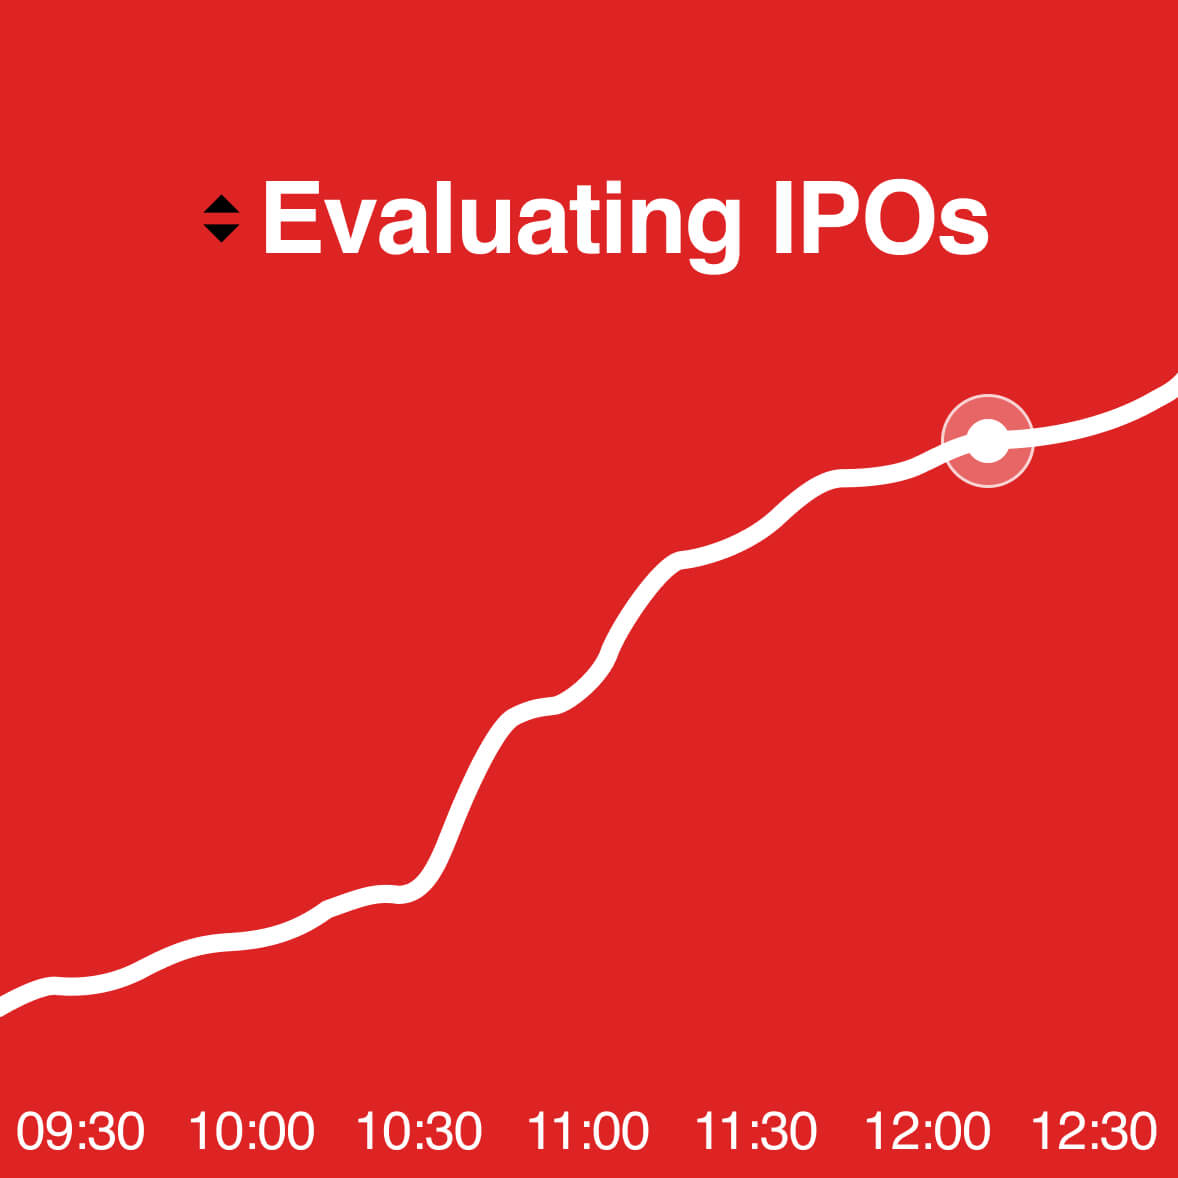 How To Tell An IPO Blockbuster From An IPO Flop